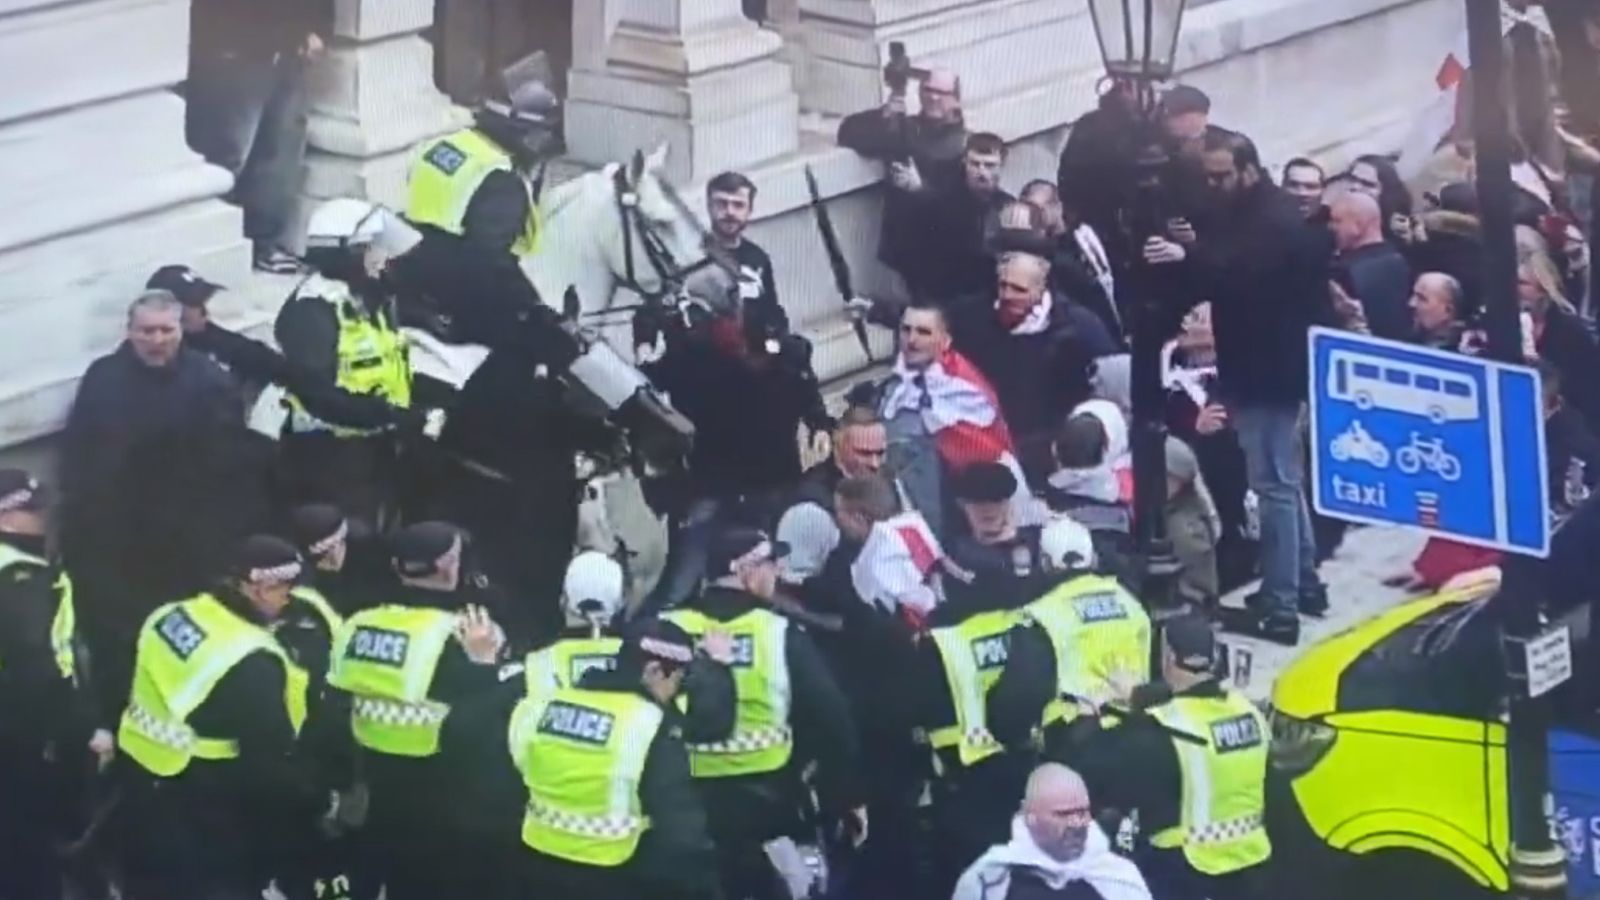 Violence breaks out at St George's Day event in central London